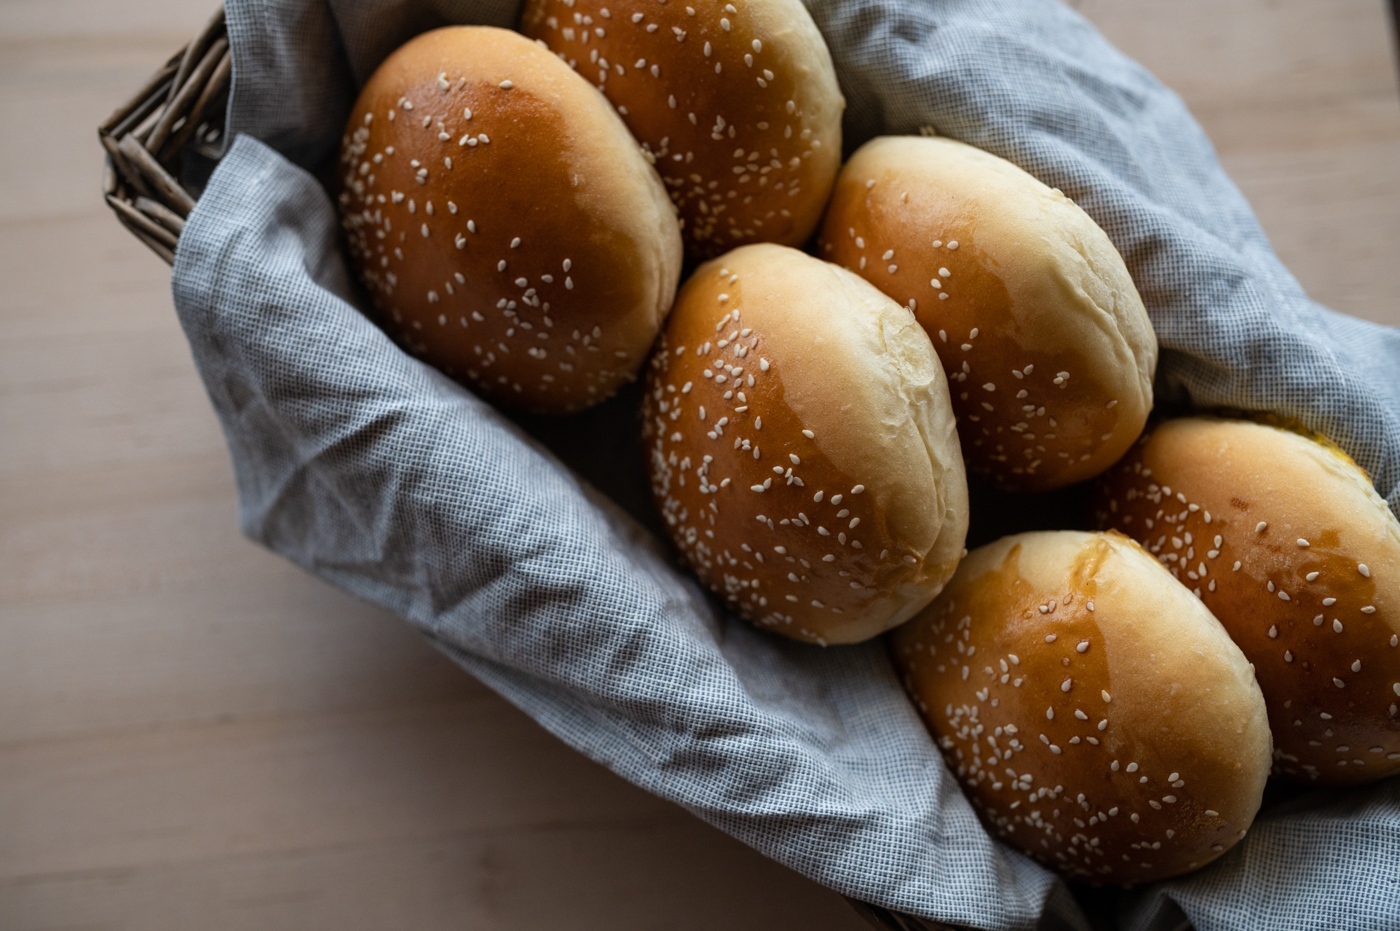 Come pick up some hot dog and burger buns to make your long weekend easy and tasty!